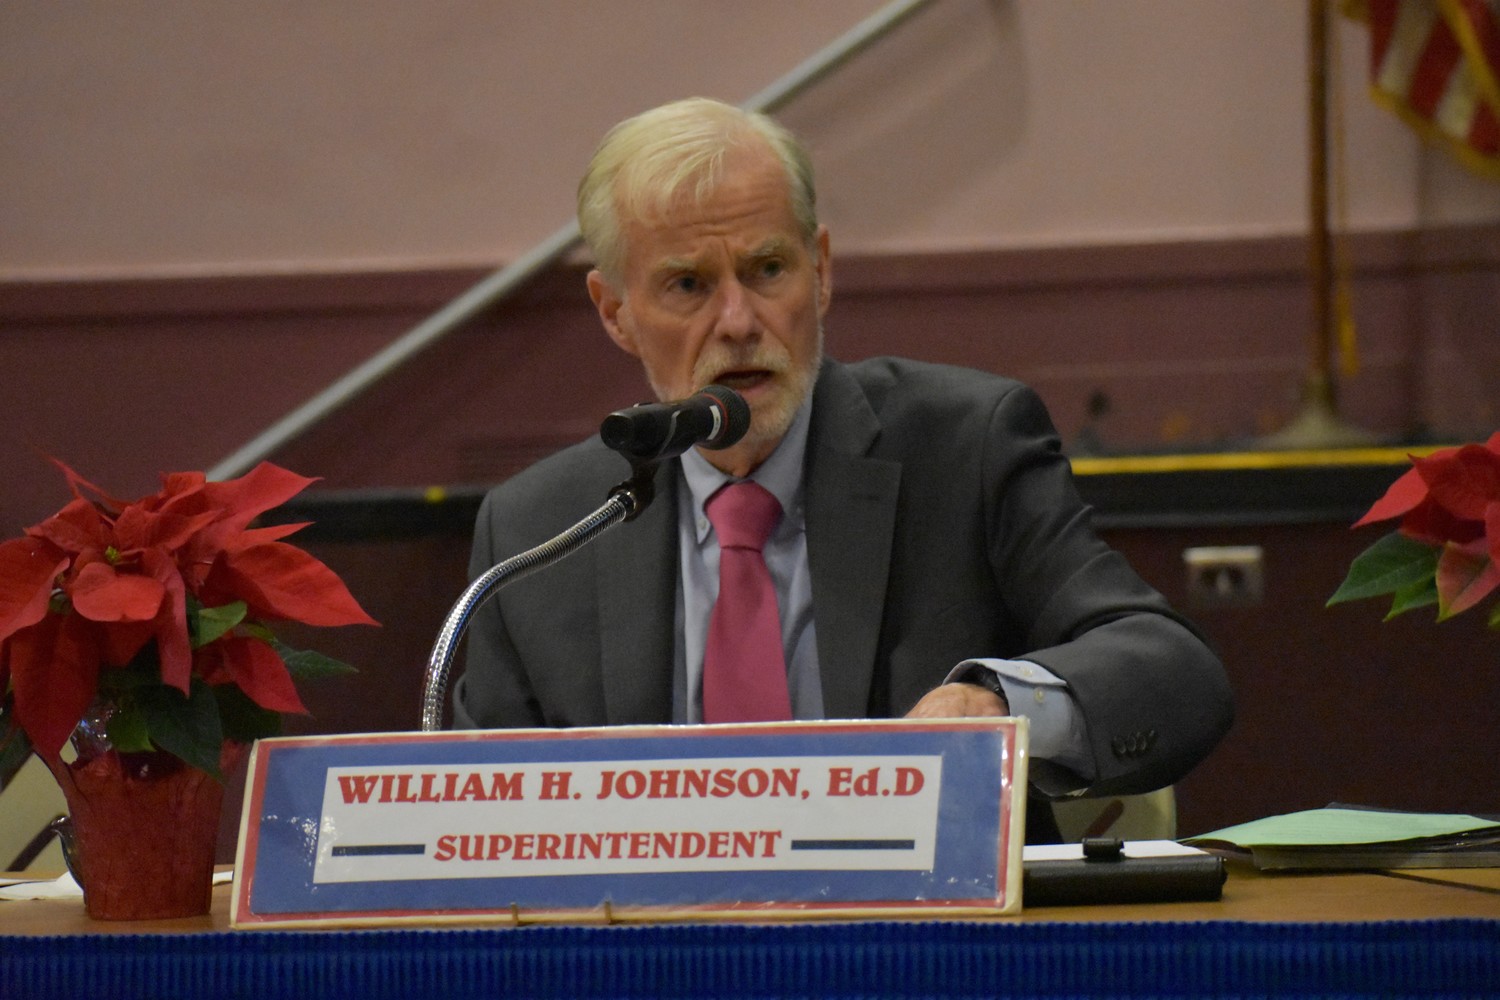 Superintendent Dr. William Johnson said that integrating different students into one classroom benefits everyone.